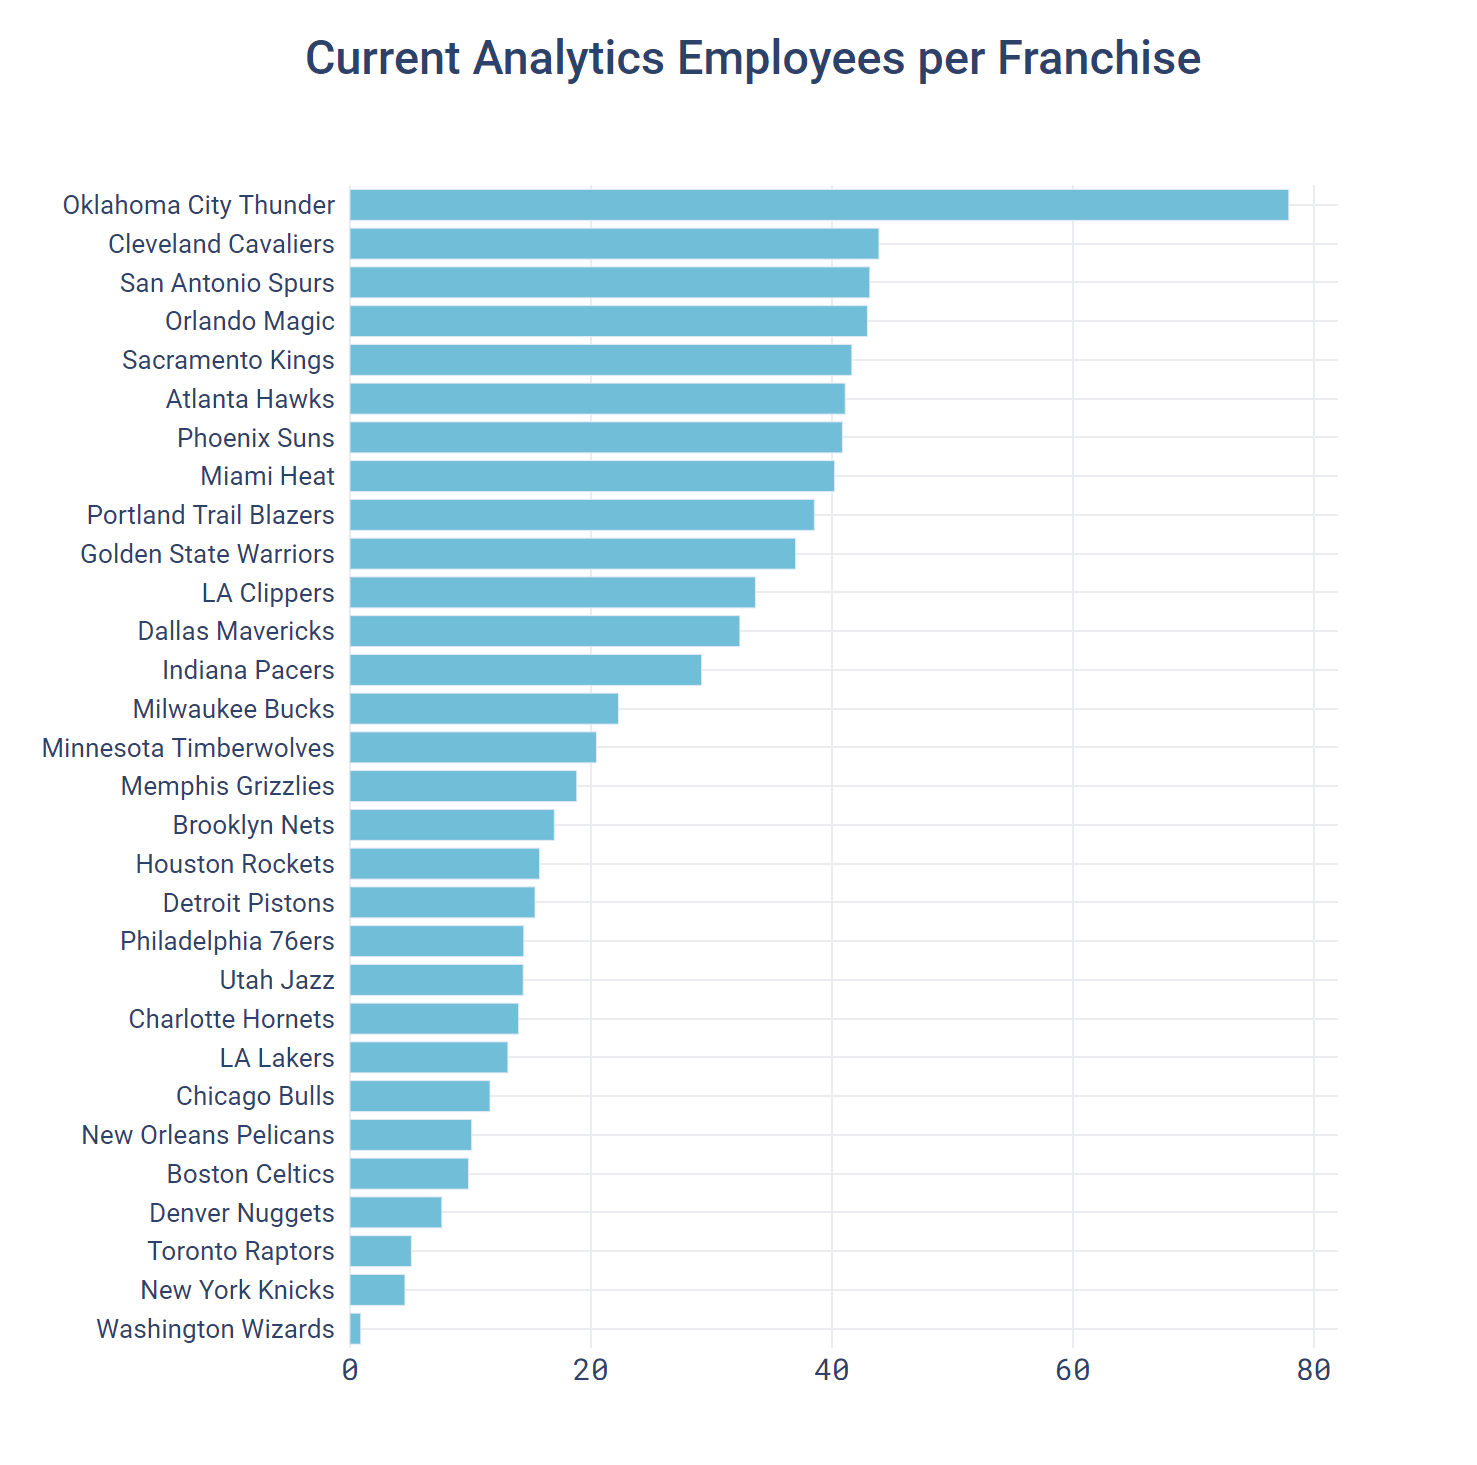 Current Analytics Employees per Franchise